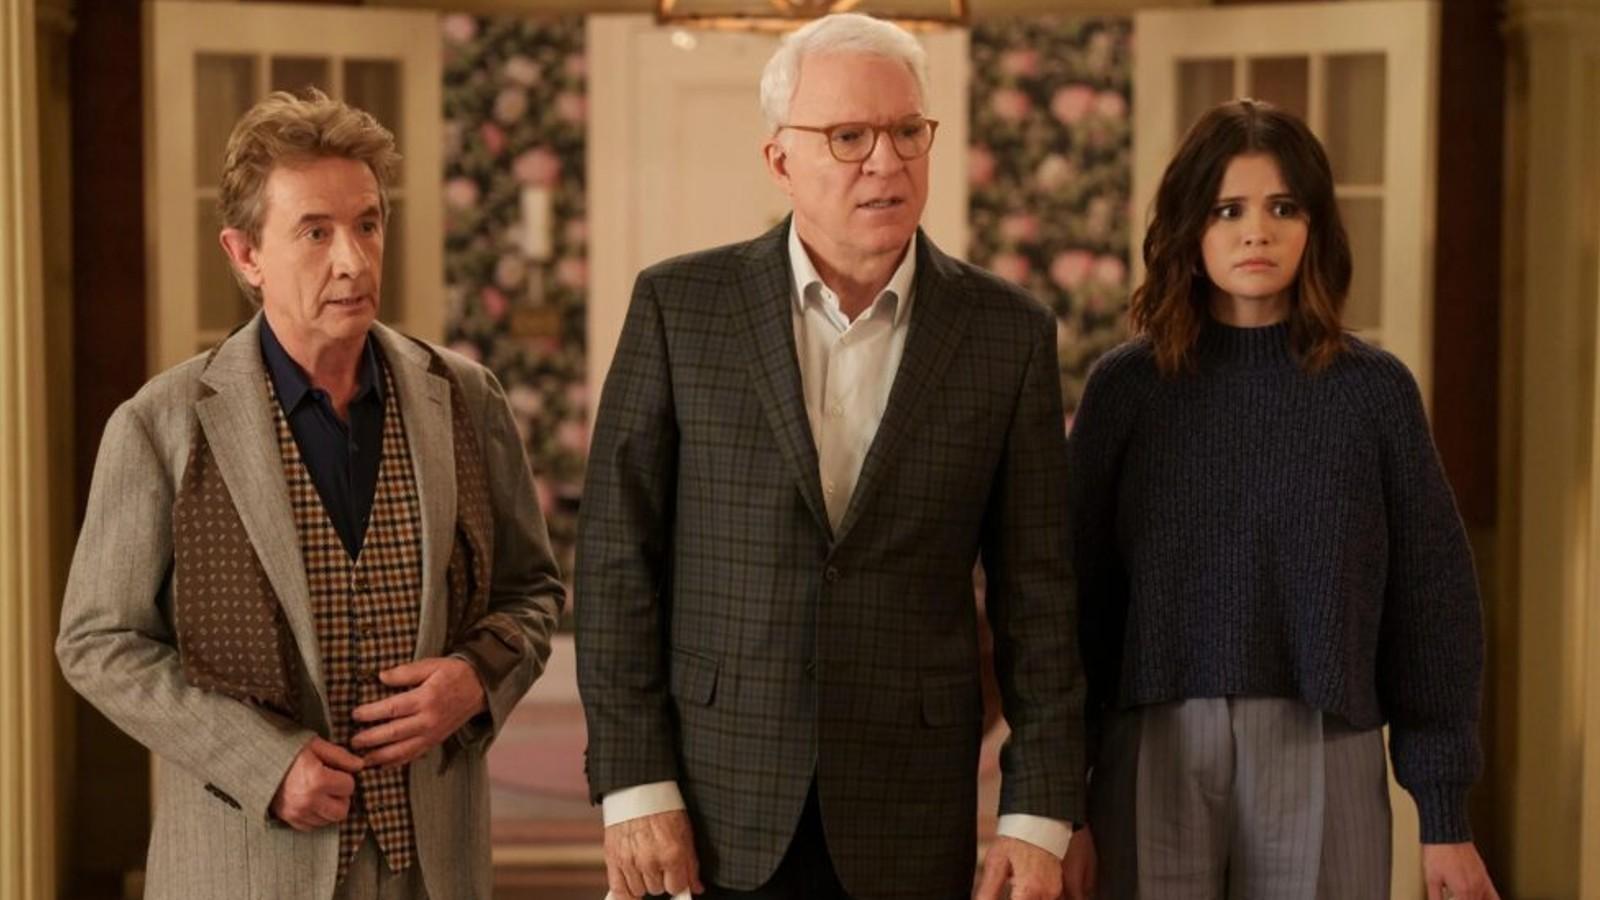 Martin Short, Steve Martin, and Selena Gomez looking shocked in Only Murders in the Building.